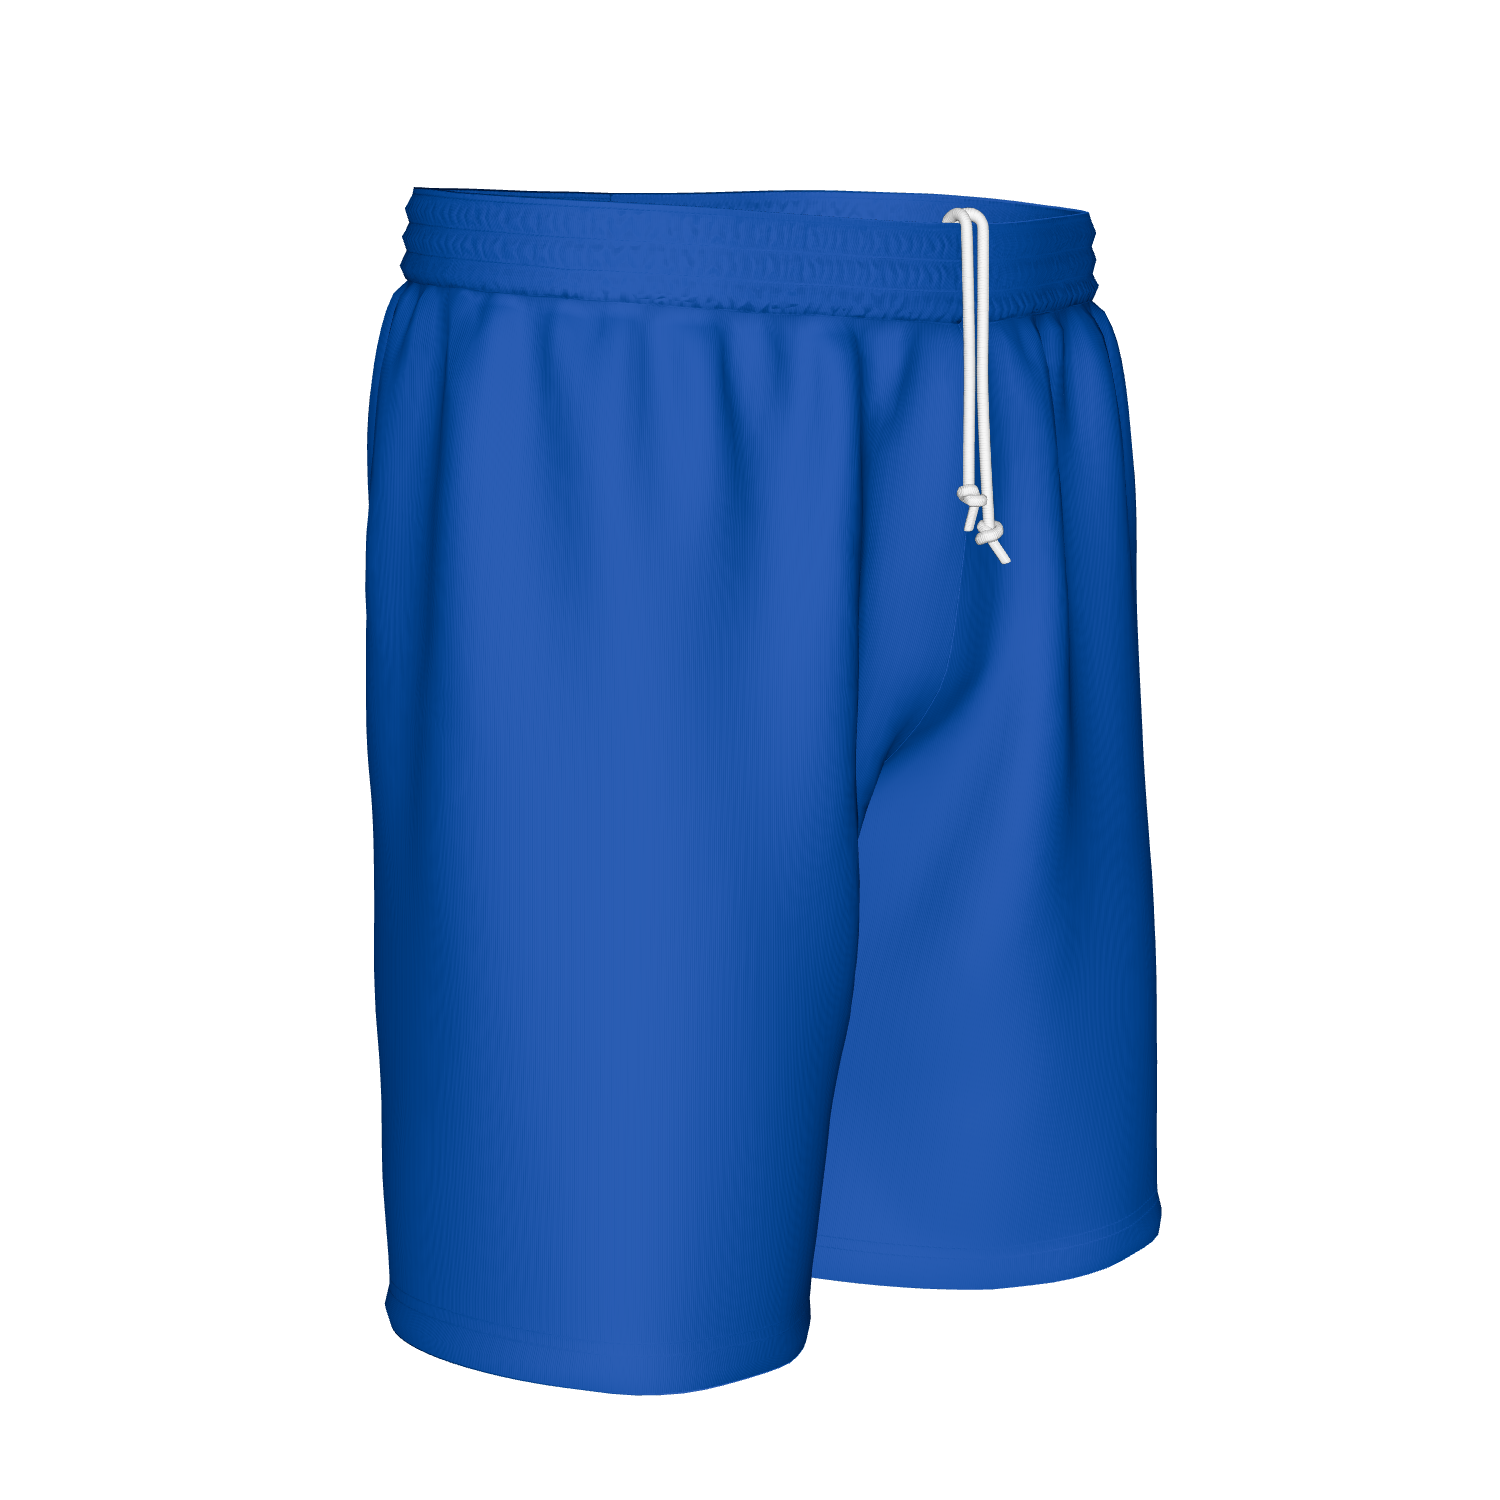 Diver men's volleyball shorts